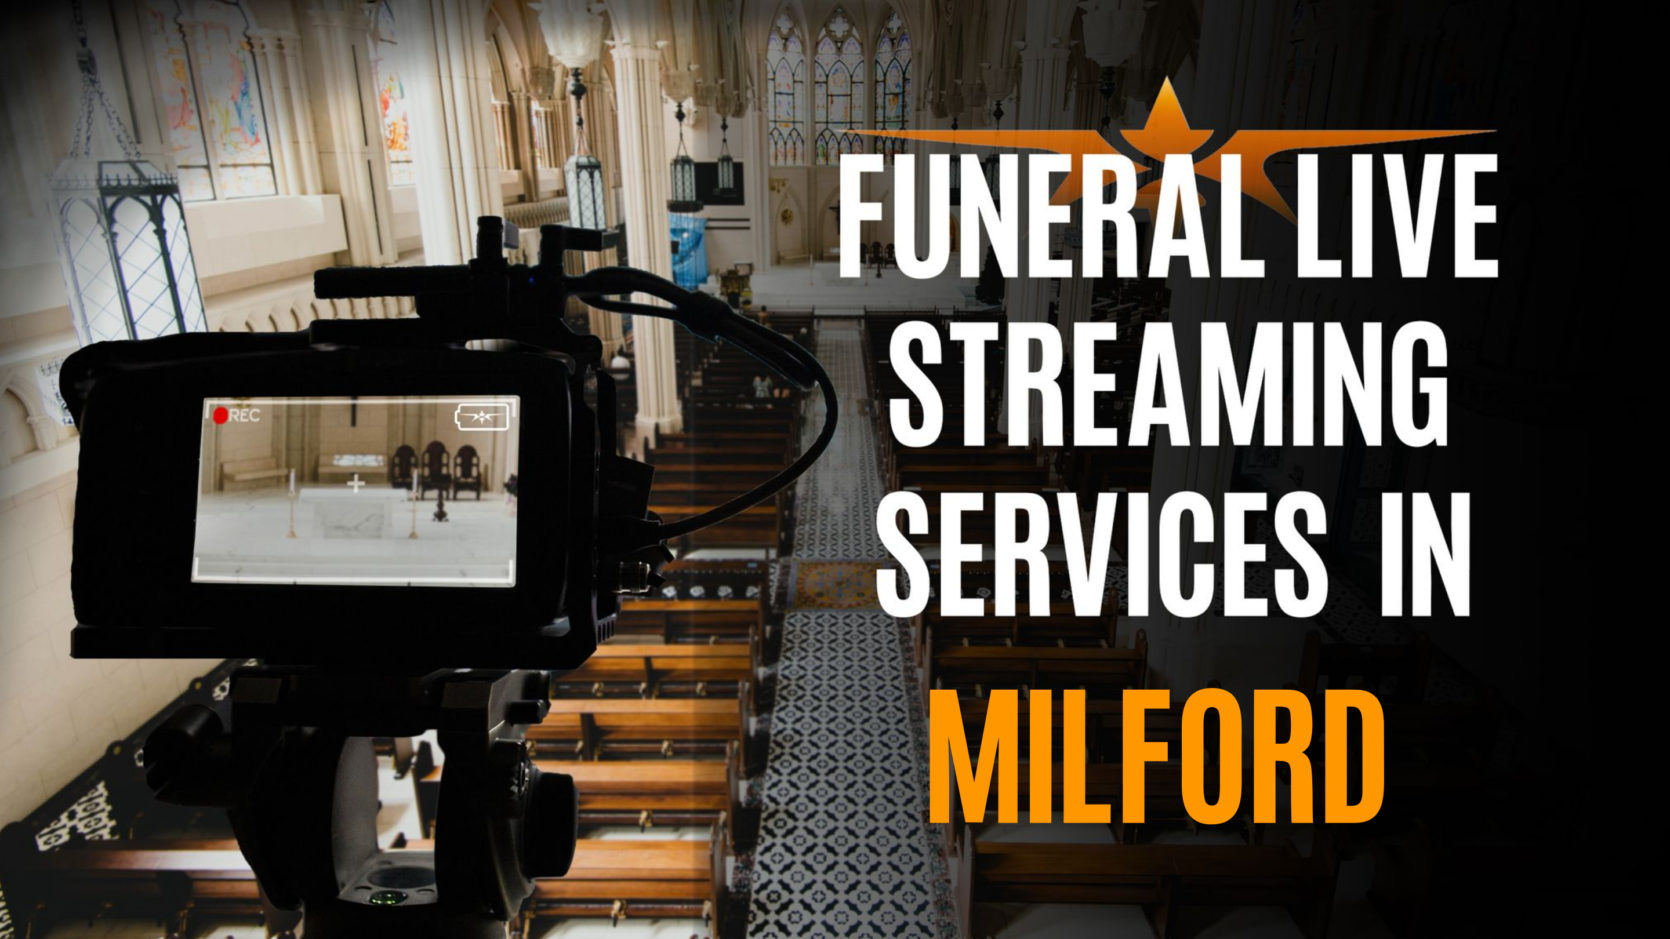 Funeral Live Streaming Services in Milford